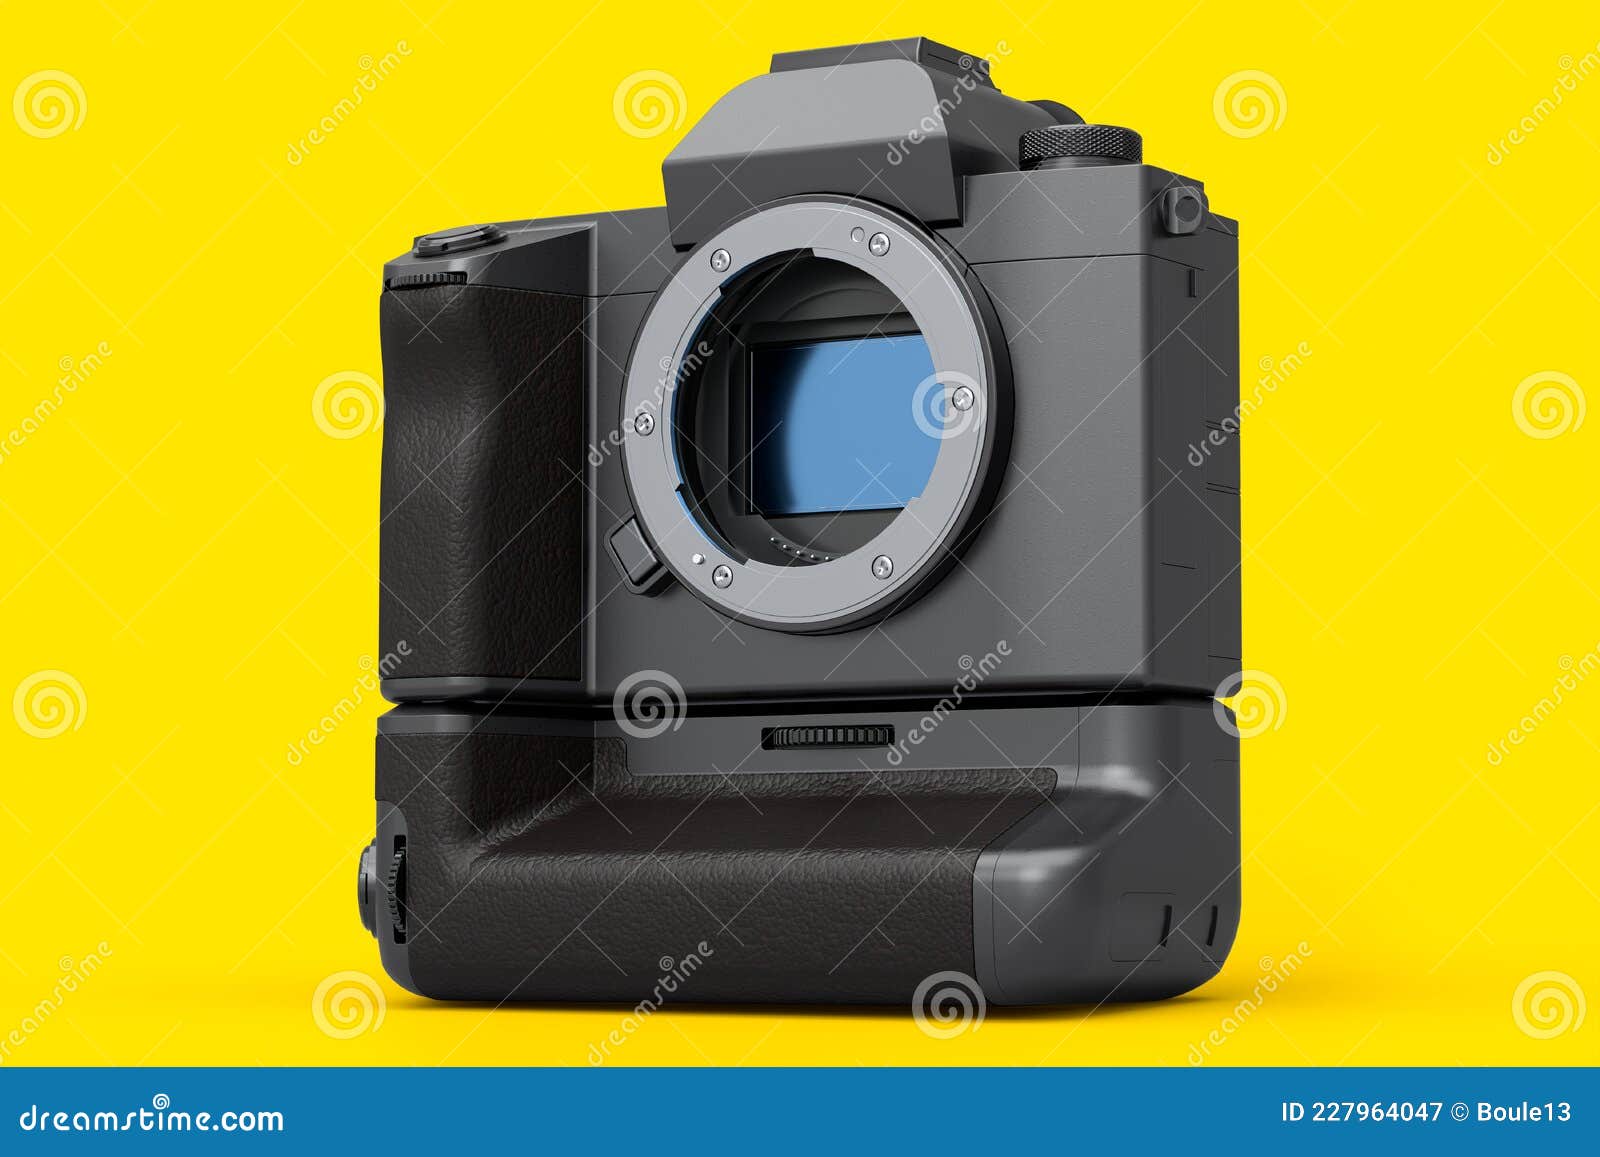 Concept of Nonexistent DSLR Camera Isolated on a Yellow Background. Stock  Illustration - Illustration of film, media: 227964047